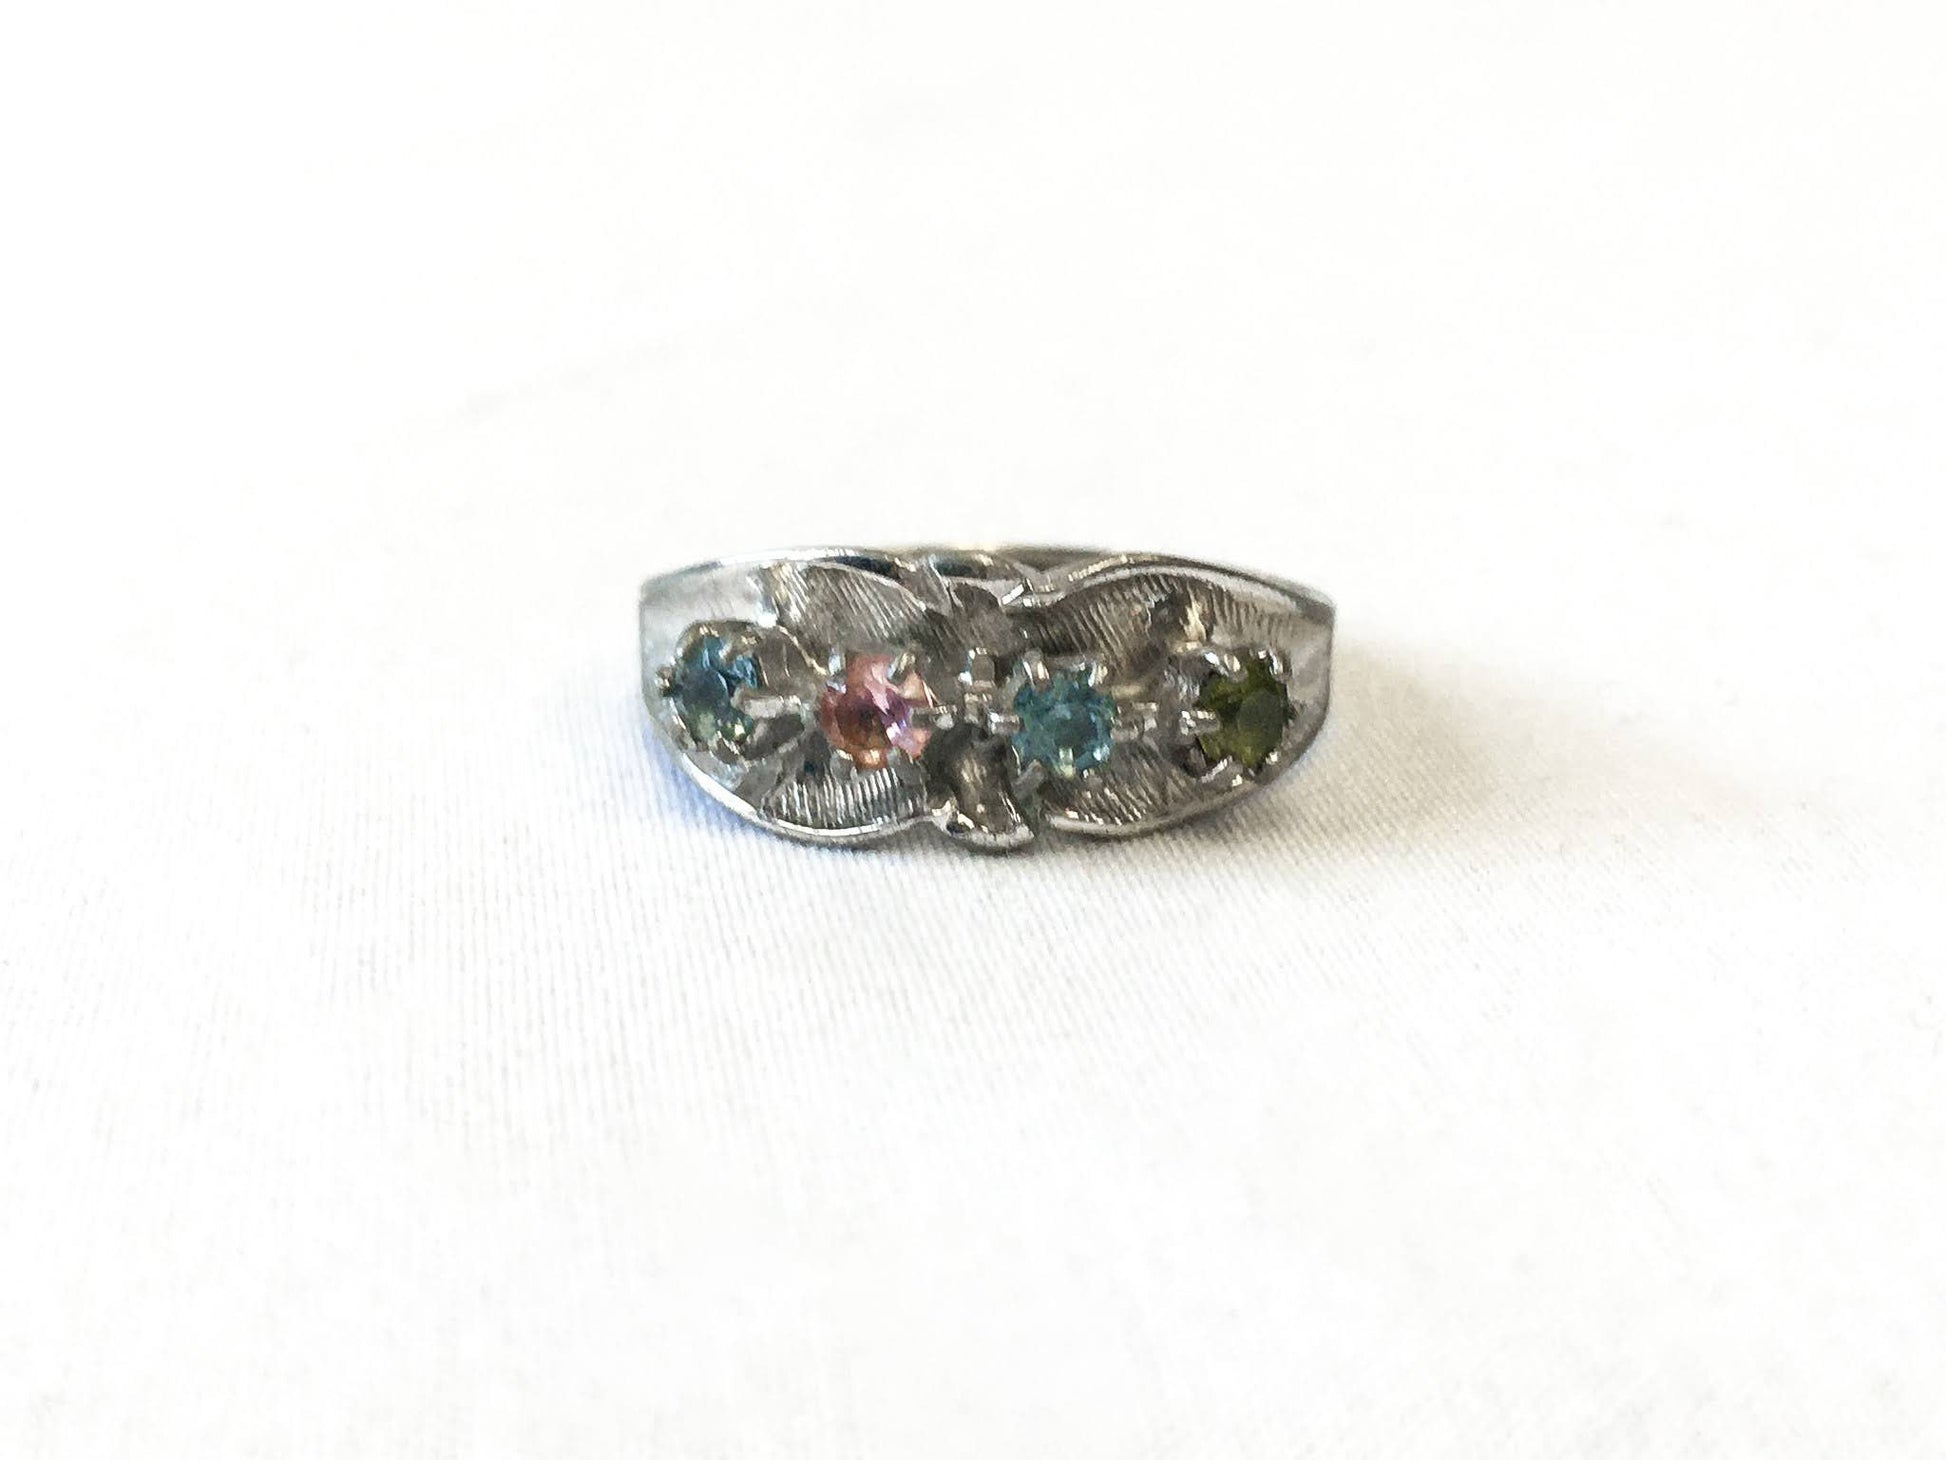 Vintage 14k White Gold Ring Multi Stone Ring, Emerald, Pink Ruby, and Aquamarine, Vintage Gold Ring, Size 7.25